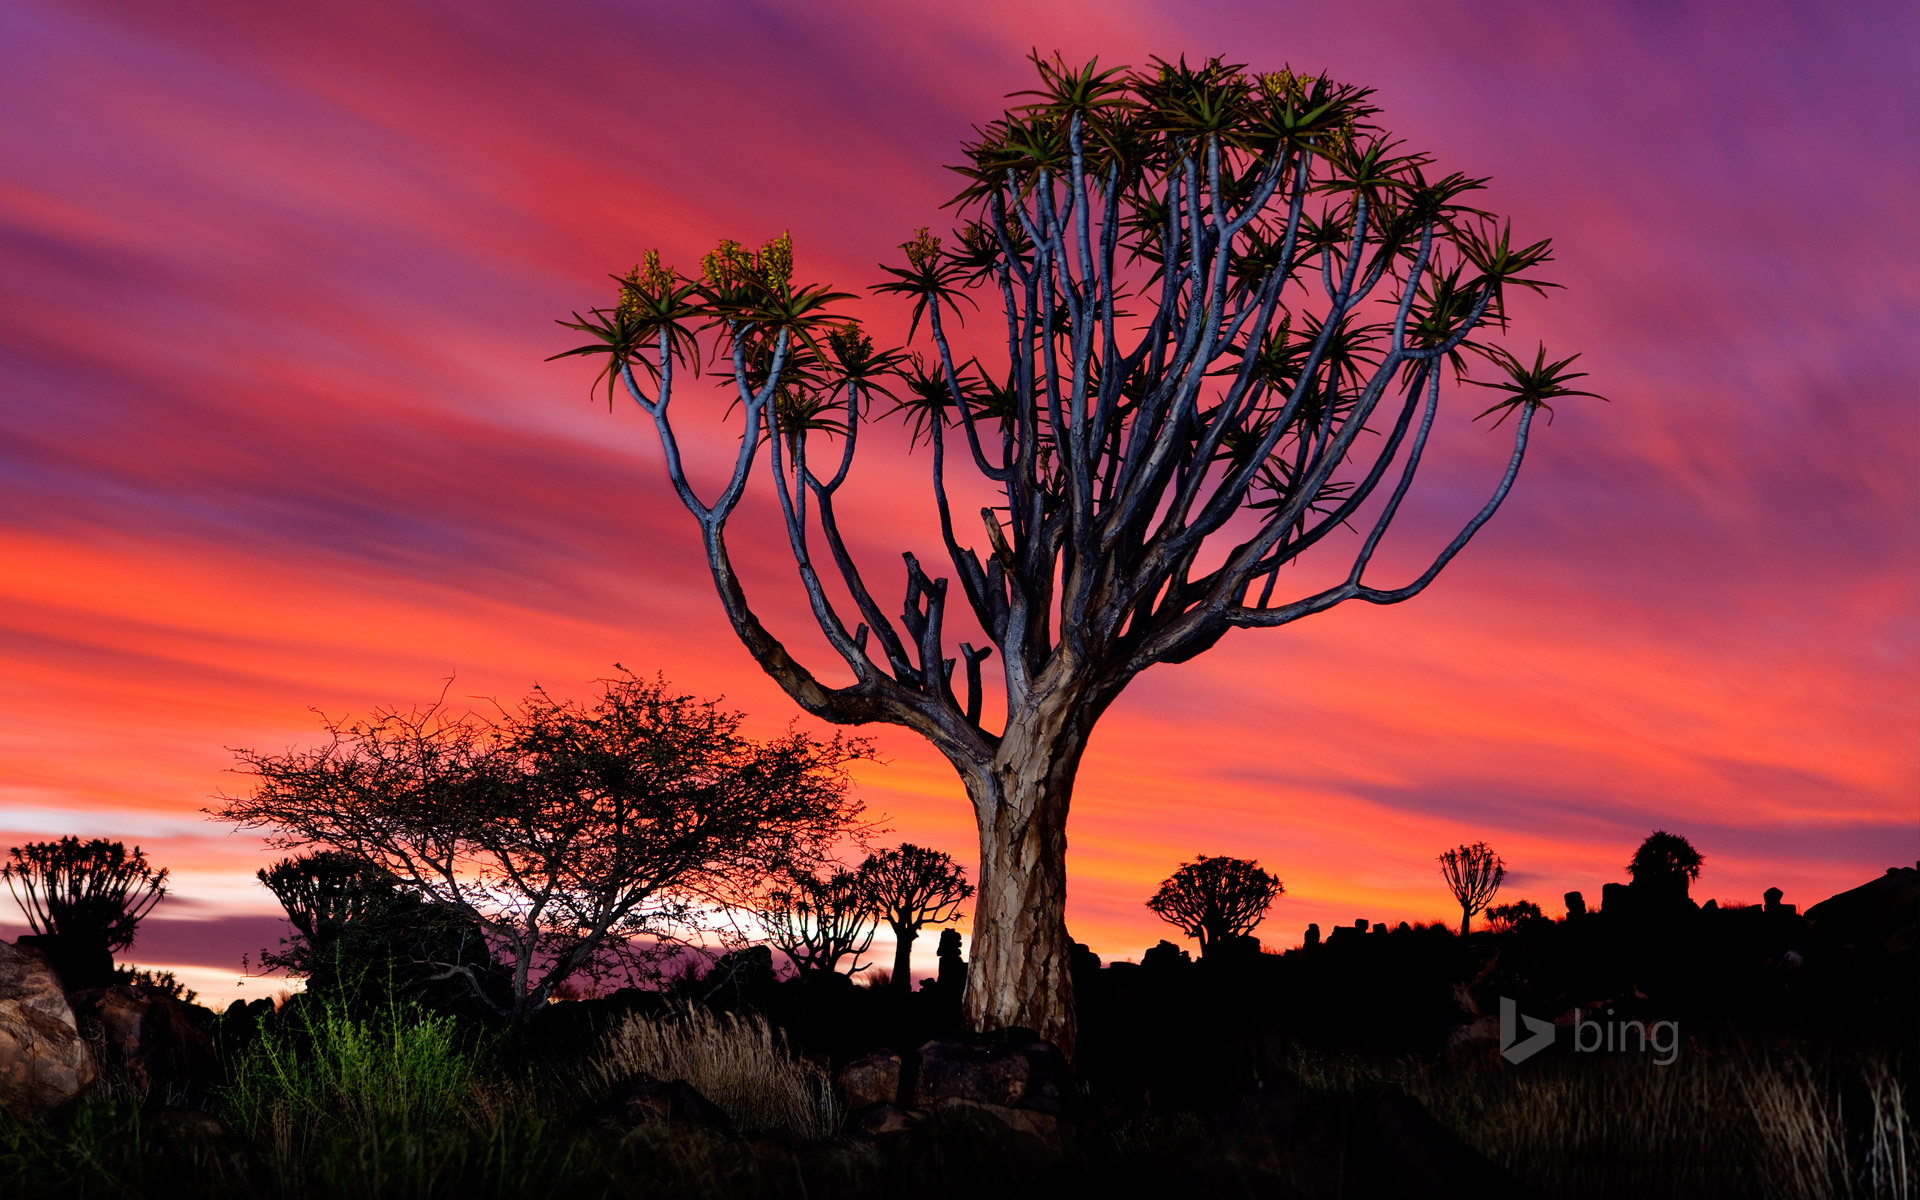 The Quiver Tree Forest near Keetmanshoop, Namibia